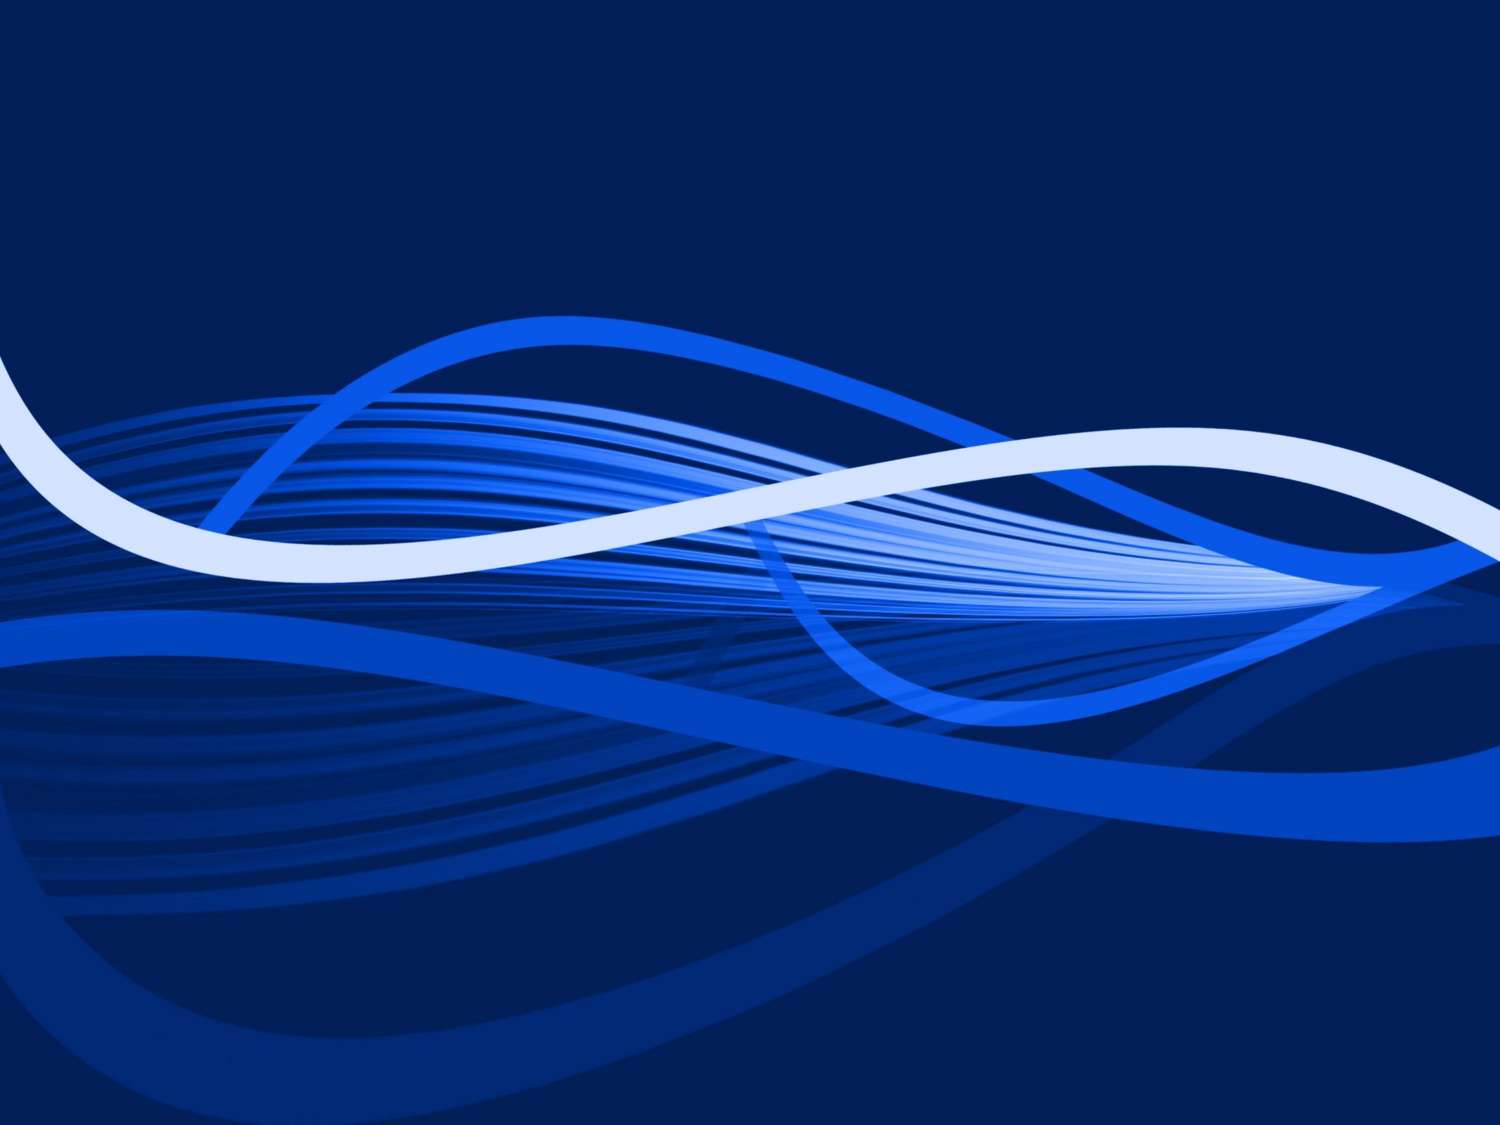 Blue Swirls Ppt Background For Your Powerpoint Templates